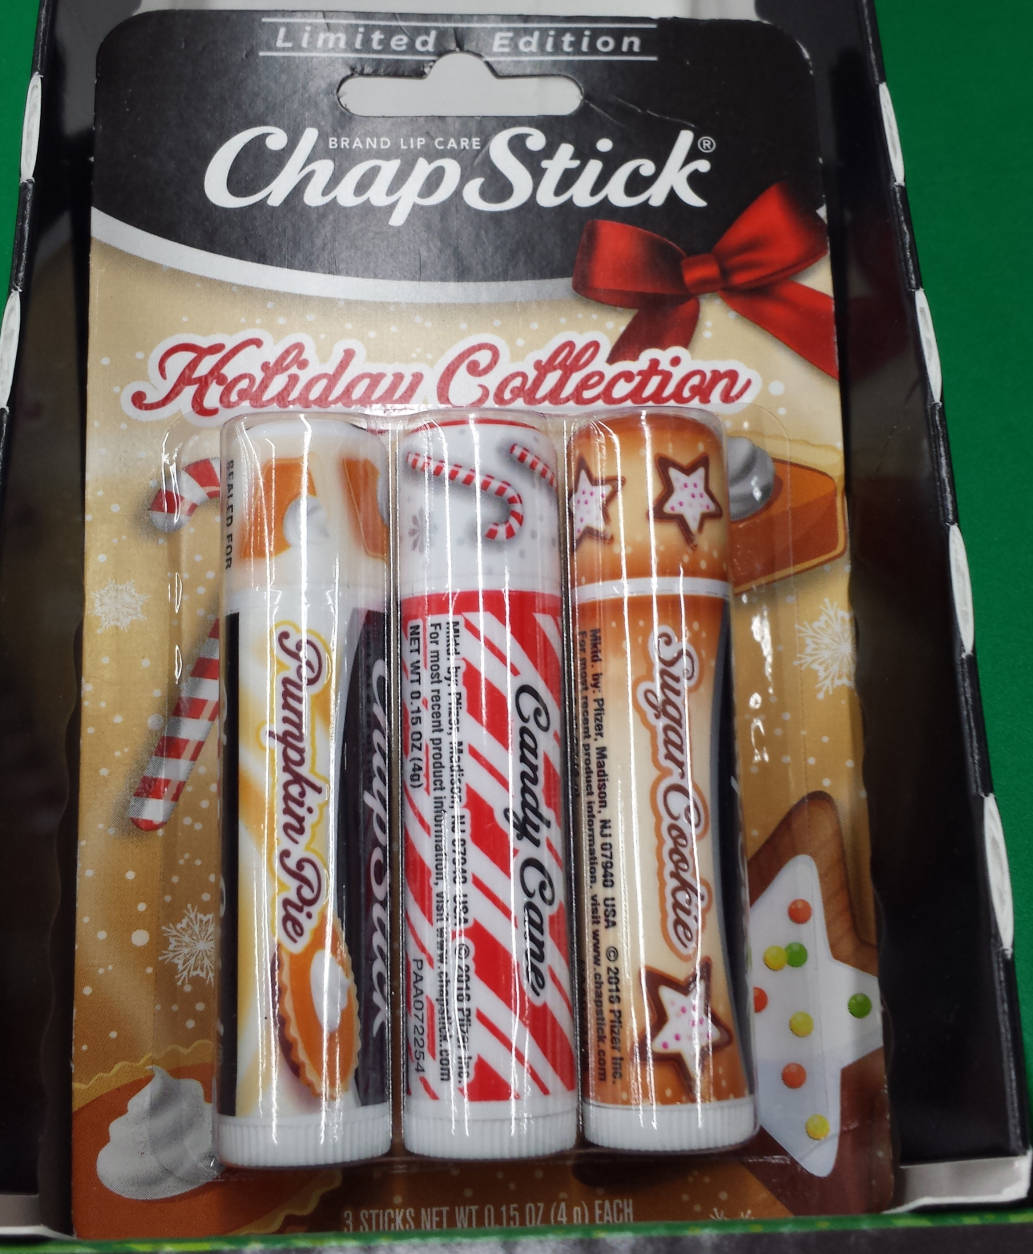 ChapStick’s Holiday collection